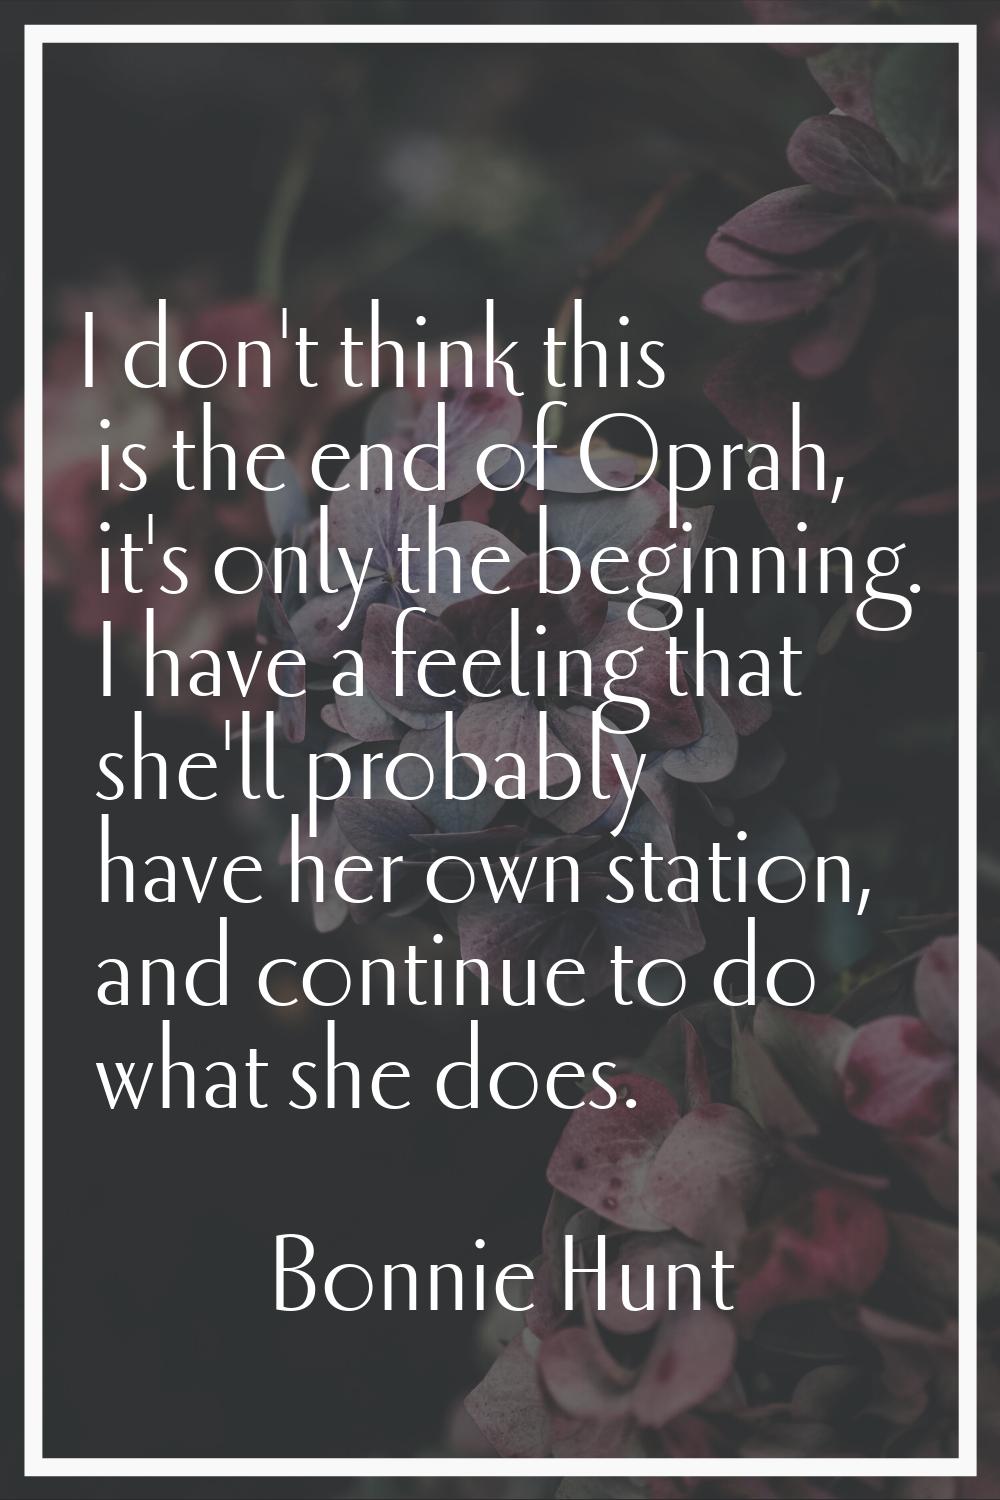 I don't think this is the end of Oprah, it's only the beginning. I have a feeling that she'll proba